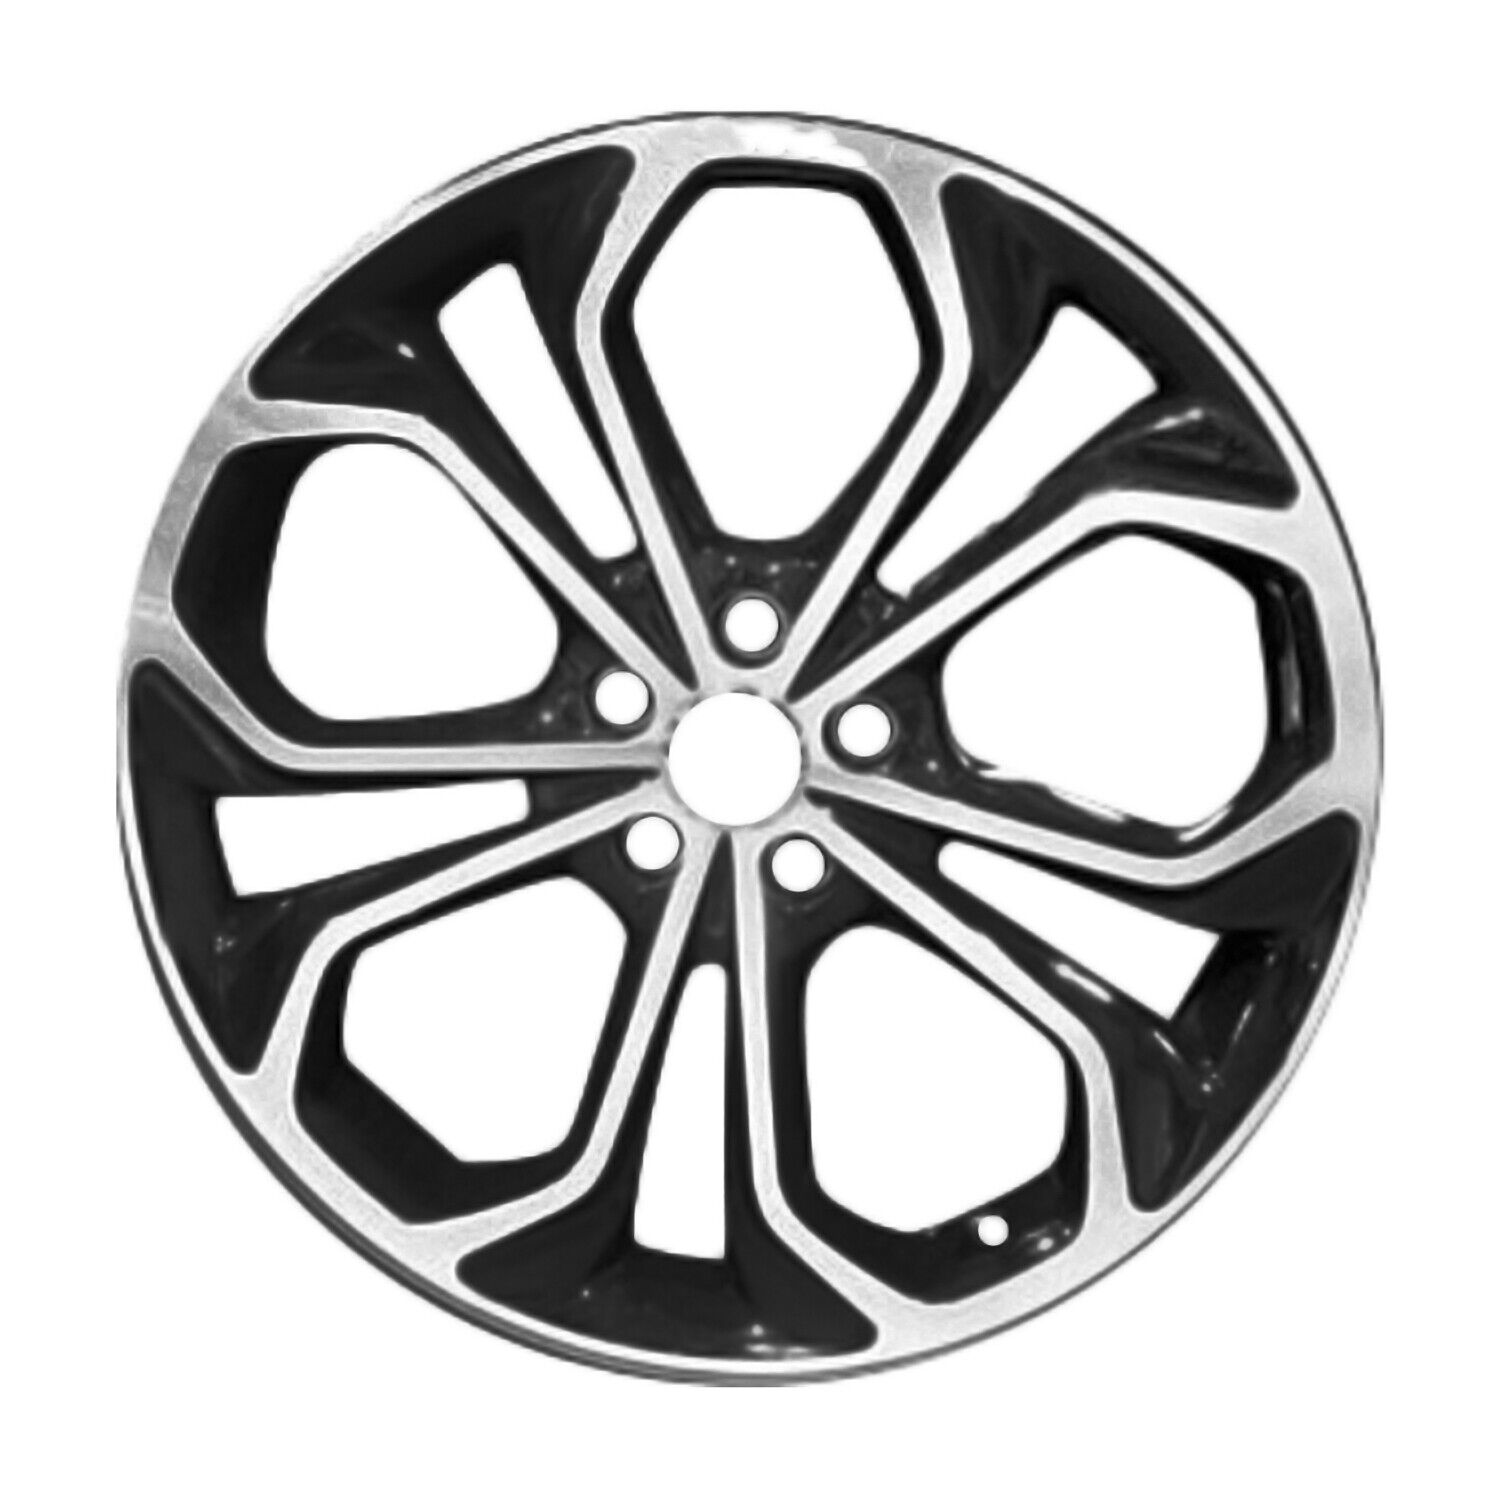 Reconditioned 20x8 Machined and Painted Black Wheel fits 560-03926